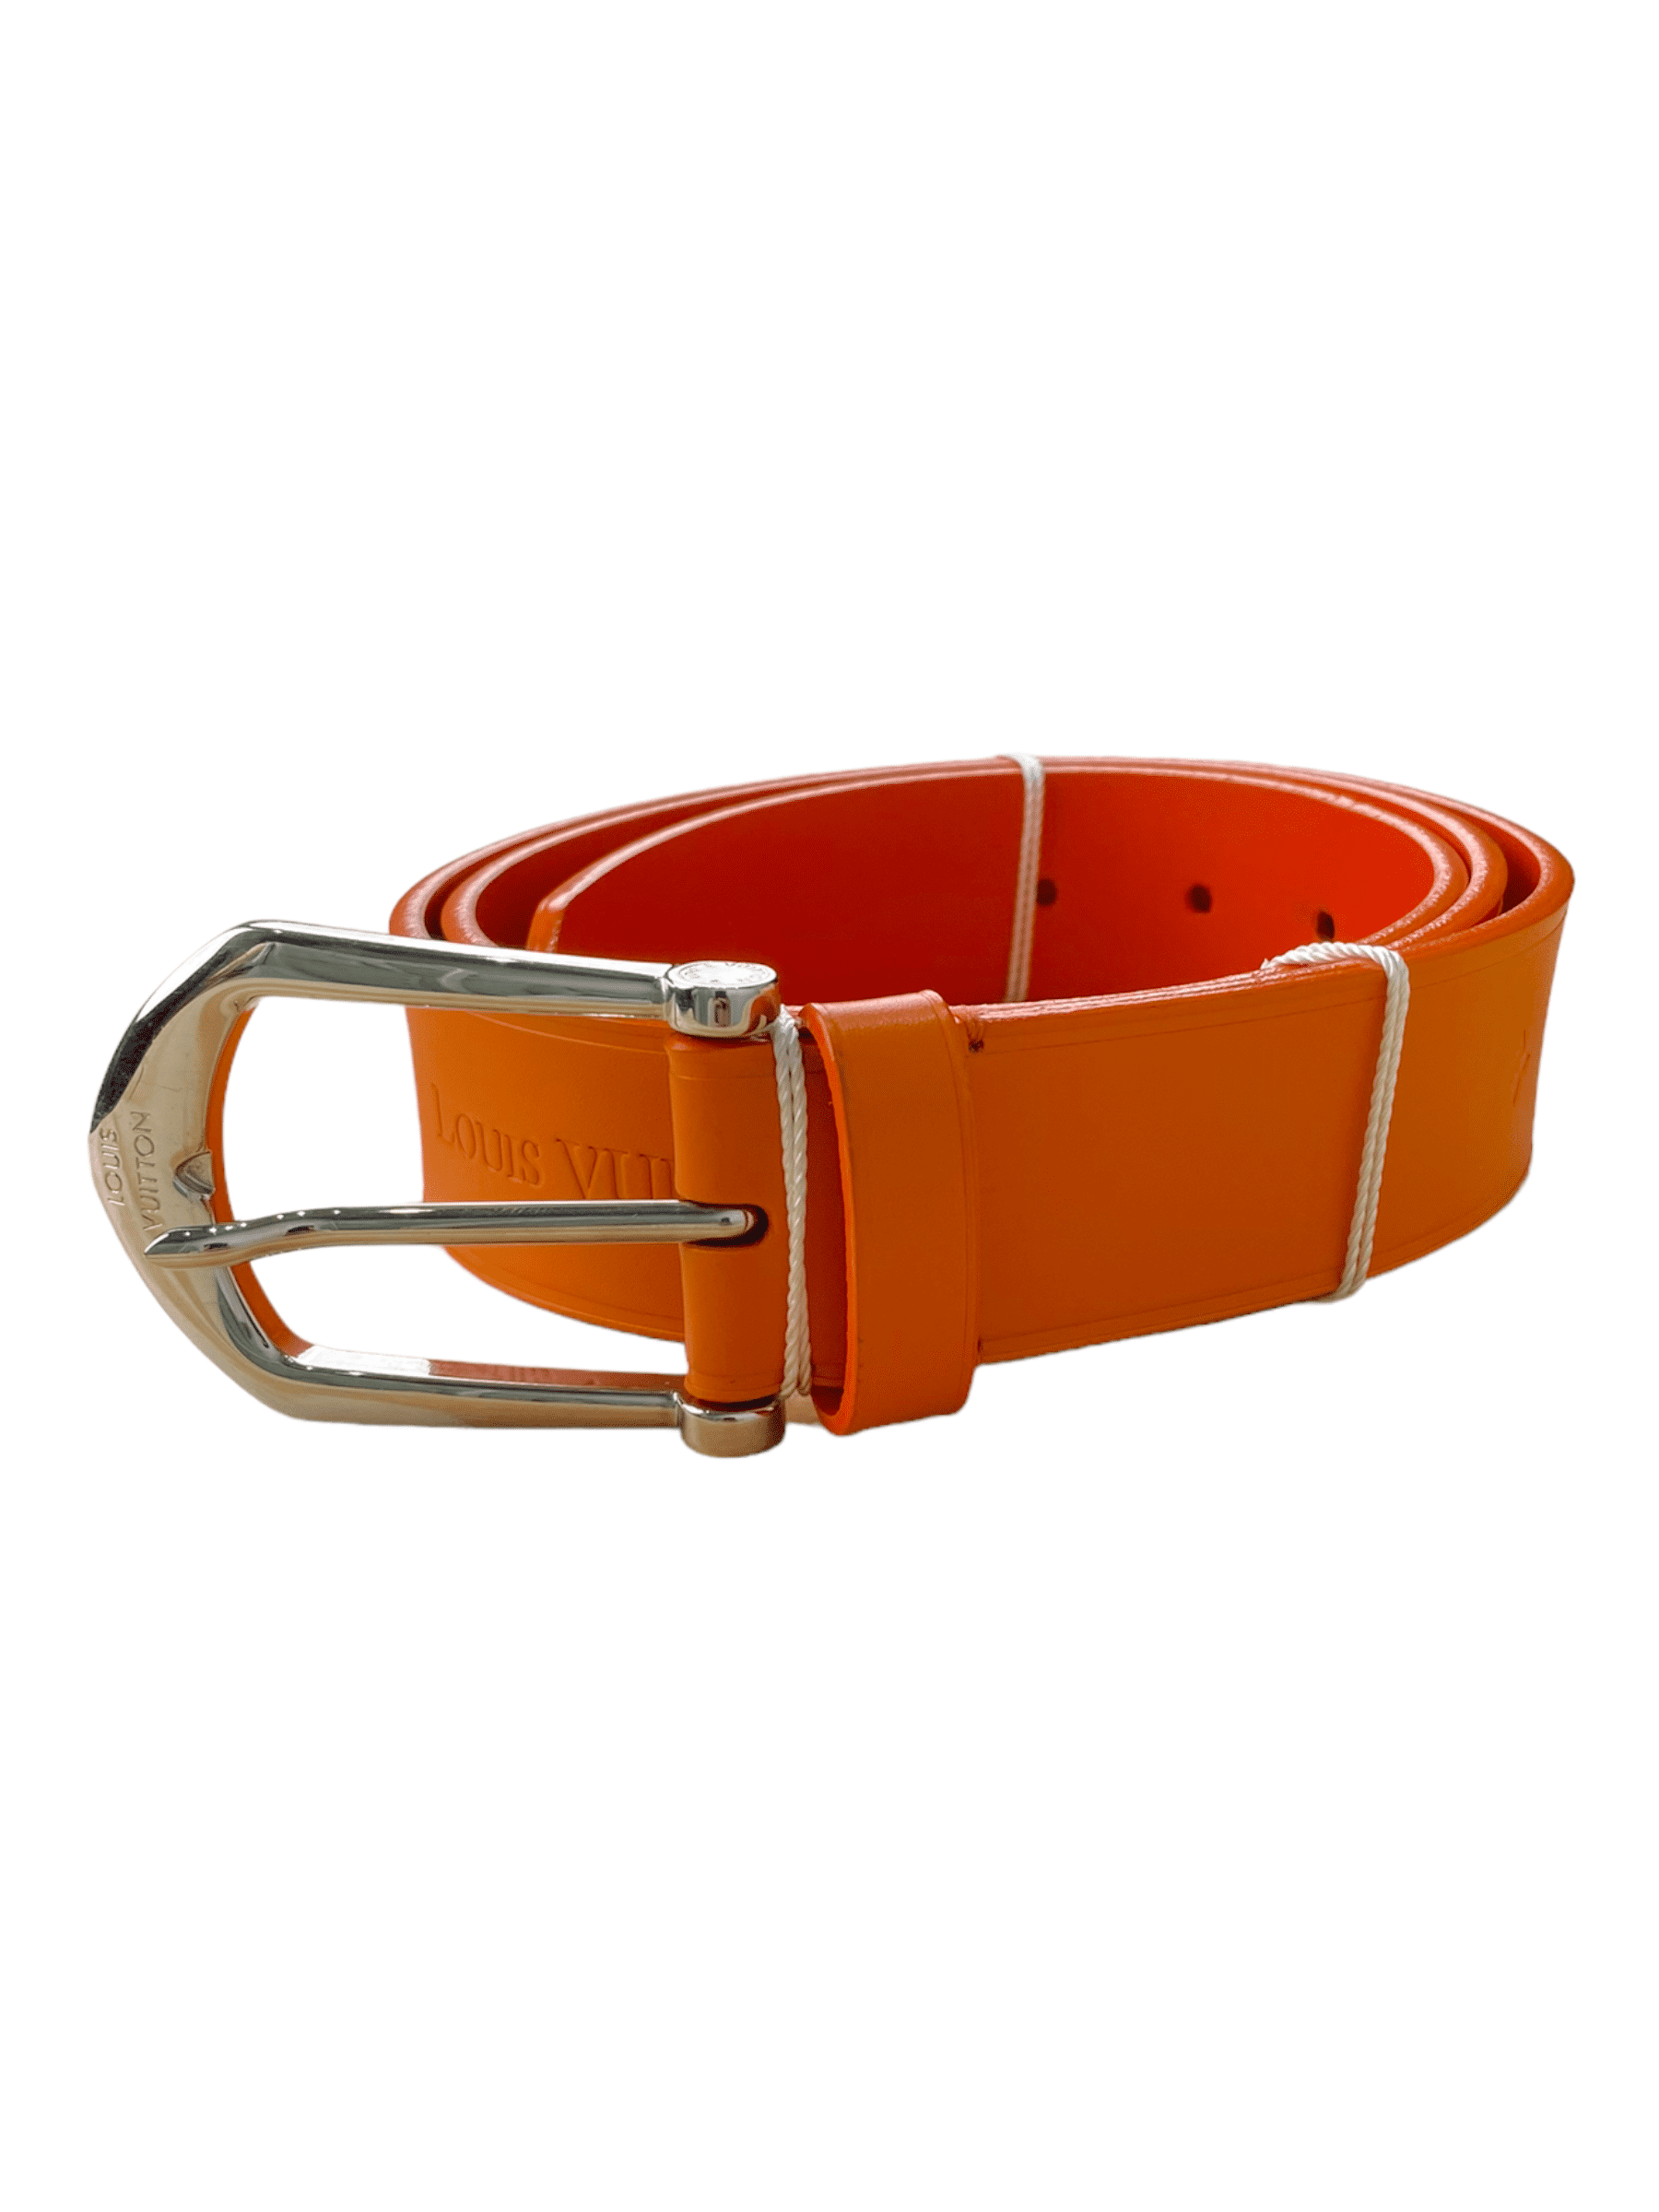 Louis Vuitton Orange Leather Belt Size 34 — Genuine Design Luxury Consignment for Men. New & Pre-Owned Clothing, Shoes, & Accessories. Calgary, Canada